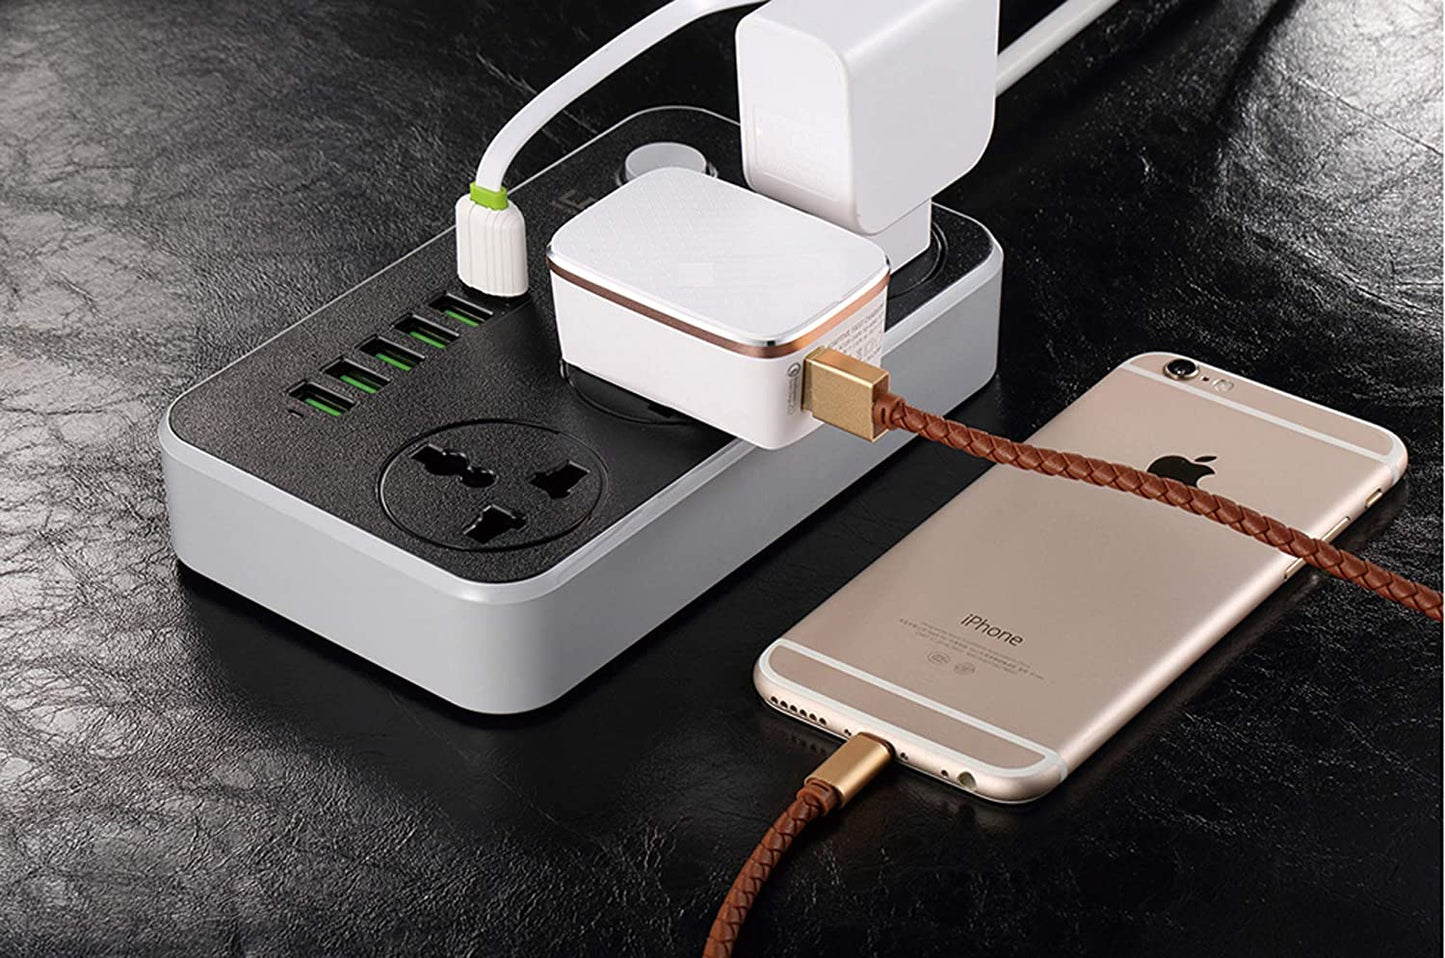 DNIO Power Strip Surge Protector with 3 Universal International Socket & Smart 6 USB Charging Ports 3.4A || 2 Metre Cord Length || 2500W 10A